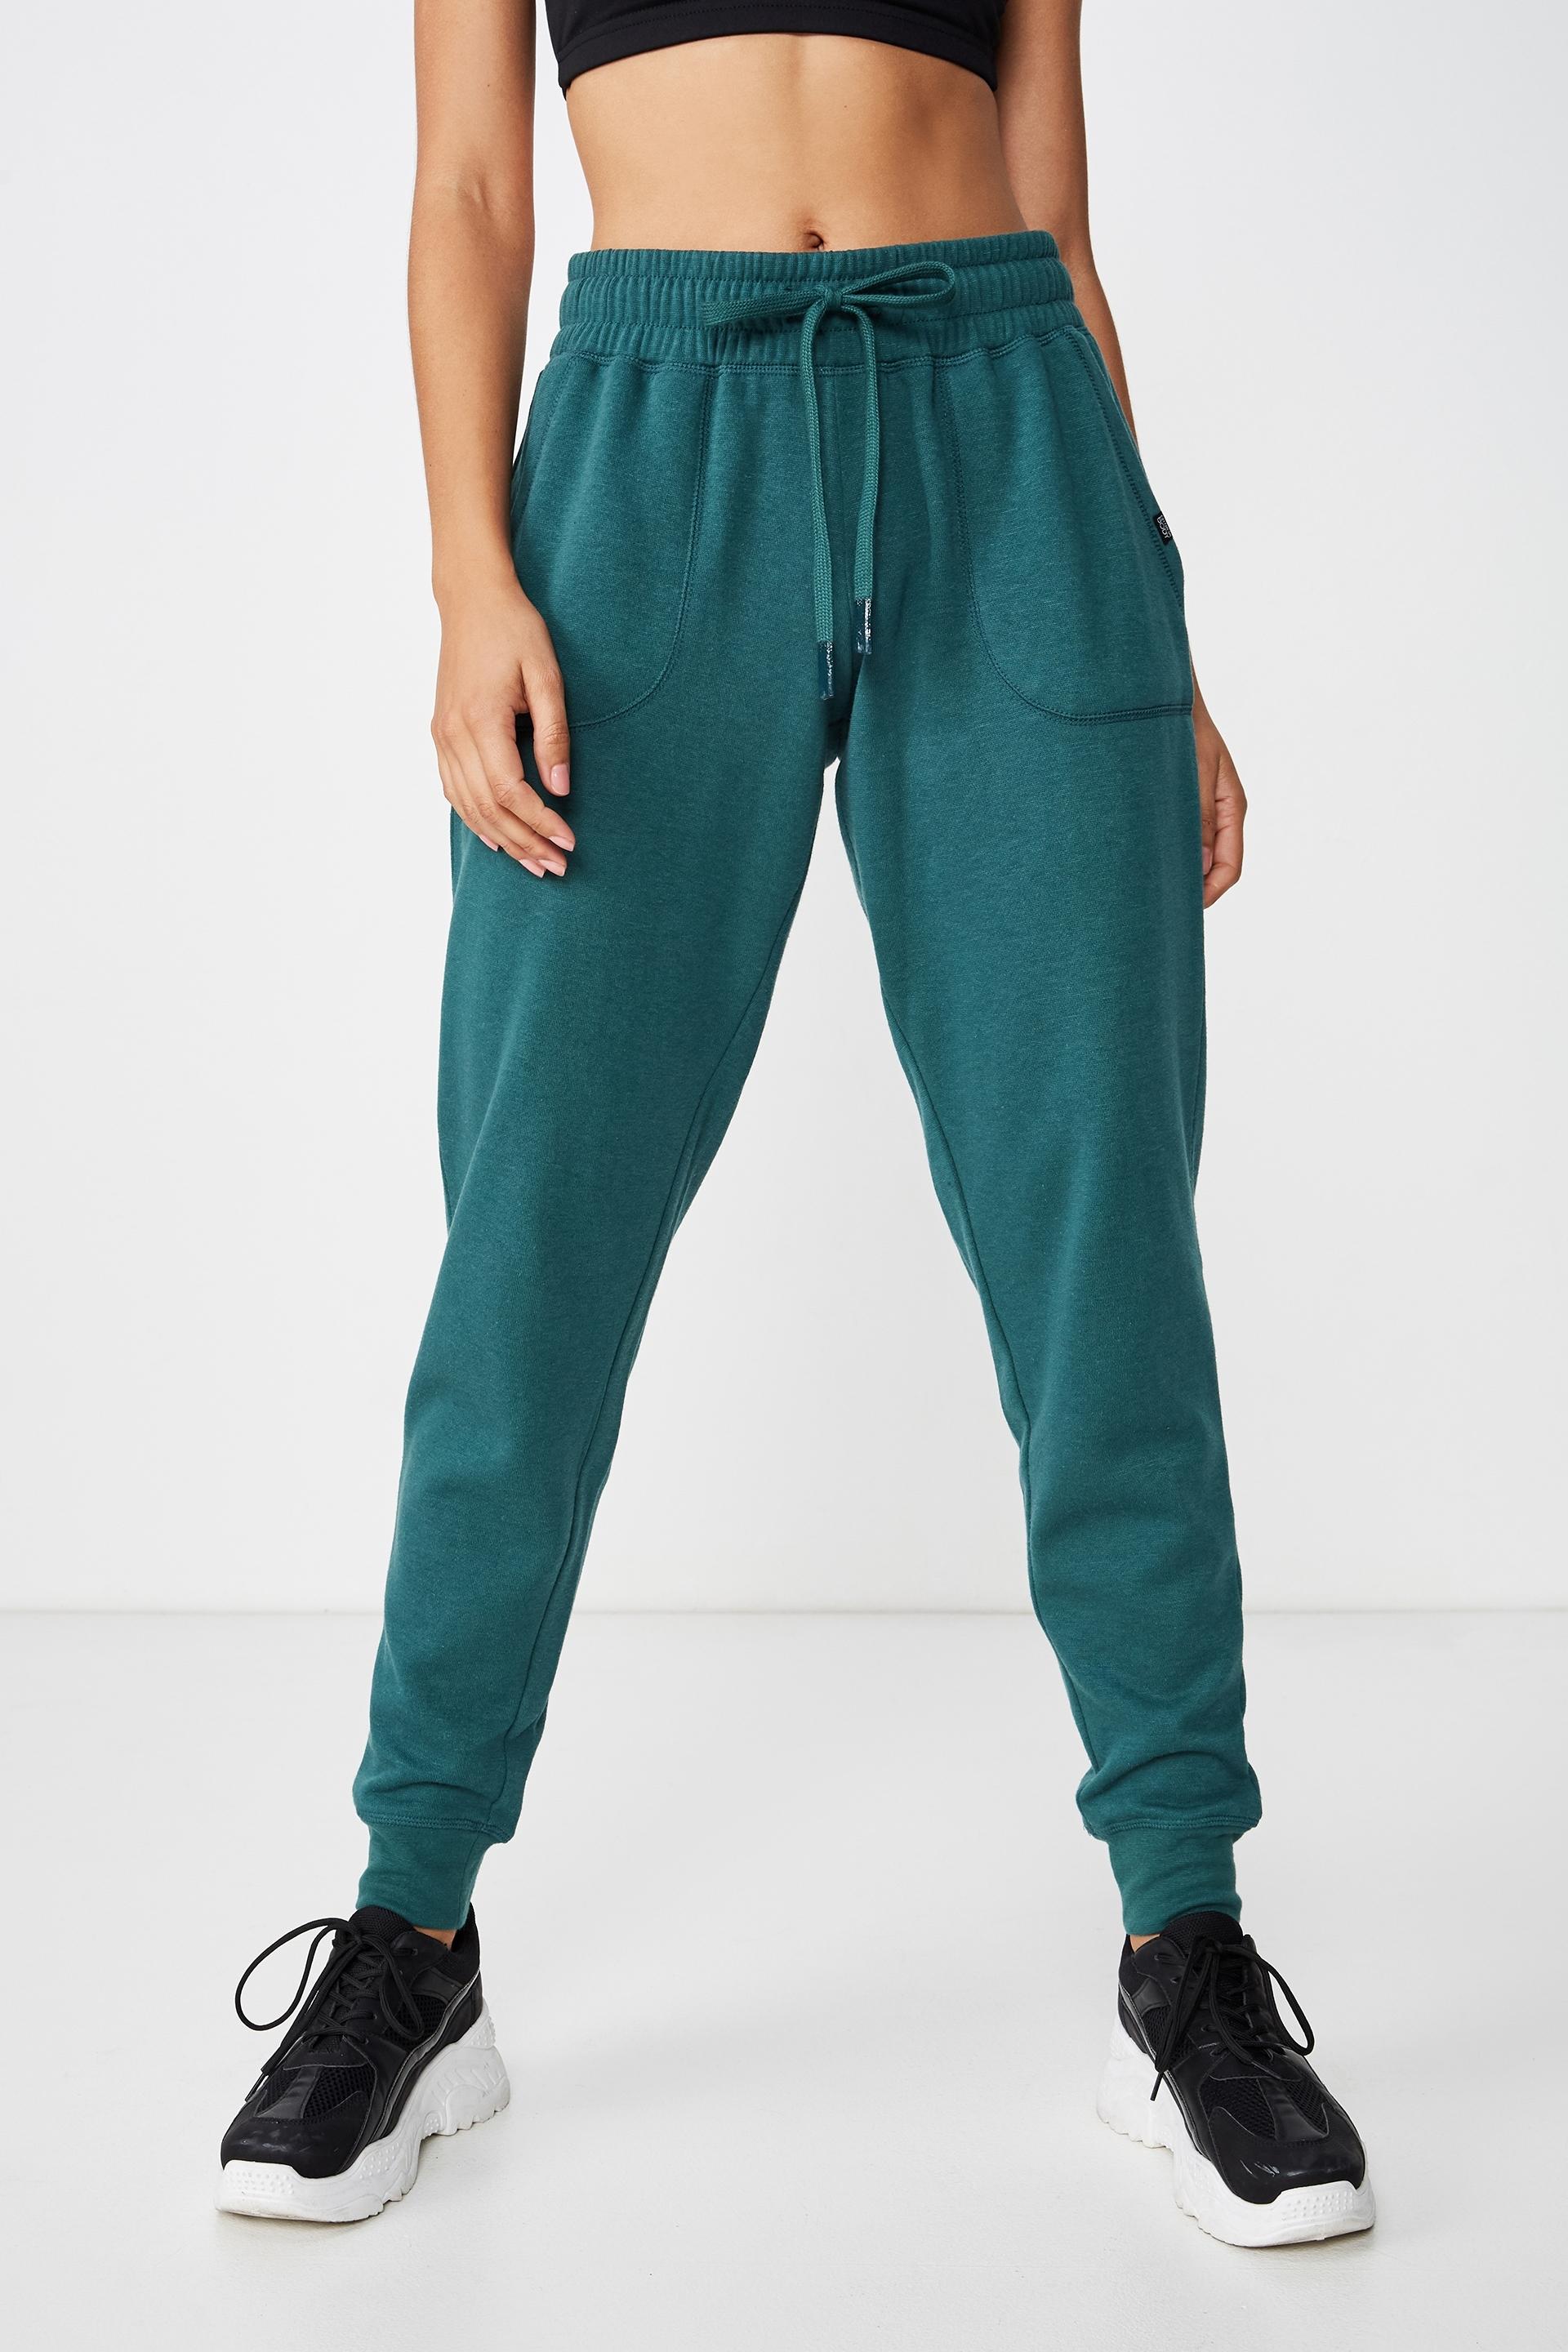 Gym track pants - jolly green Cotton On Bottoms | Superbalist.com